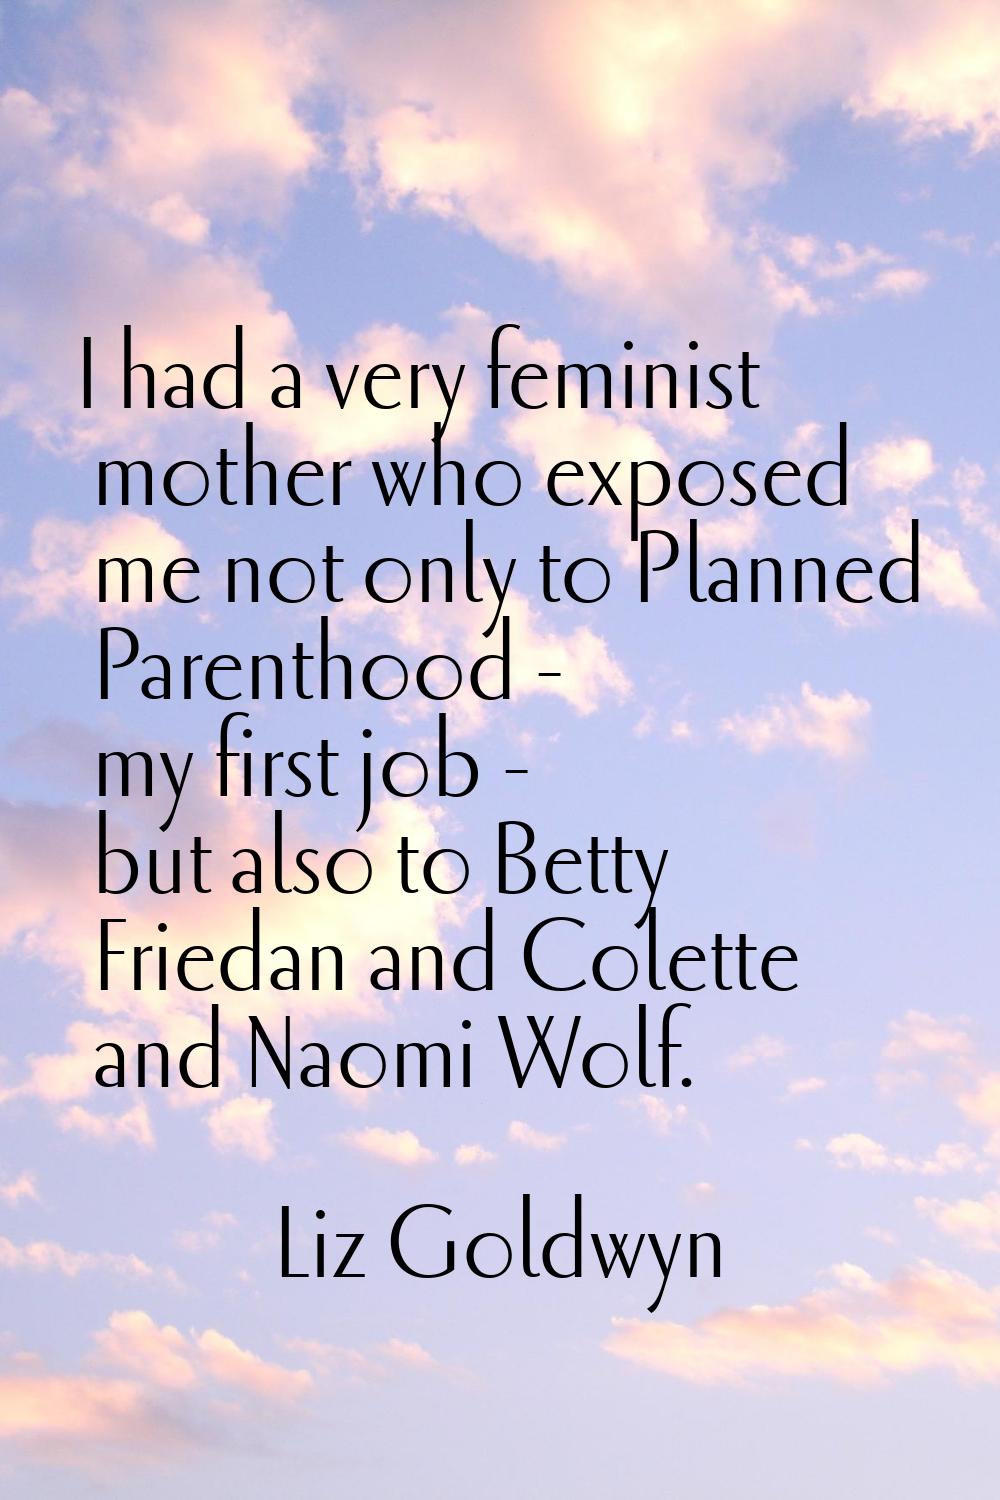 I had a very feminist mother who exposed me not only to Planned Parenthood - my first job - but als